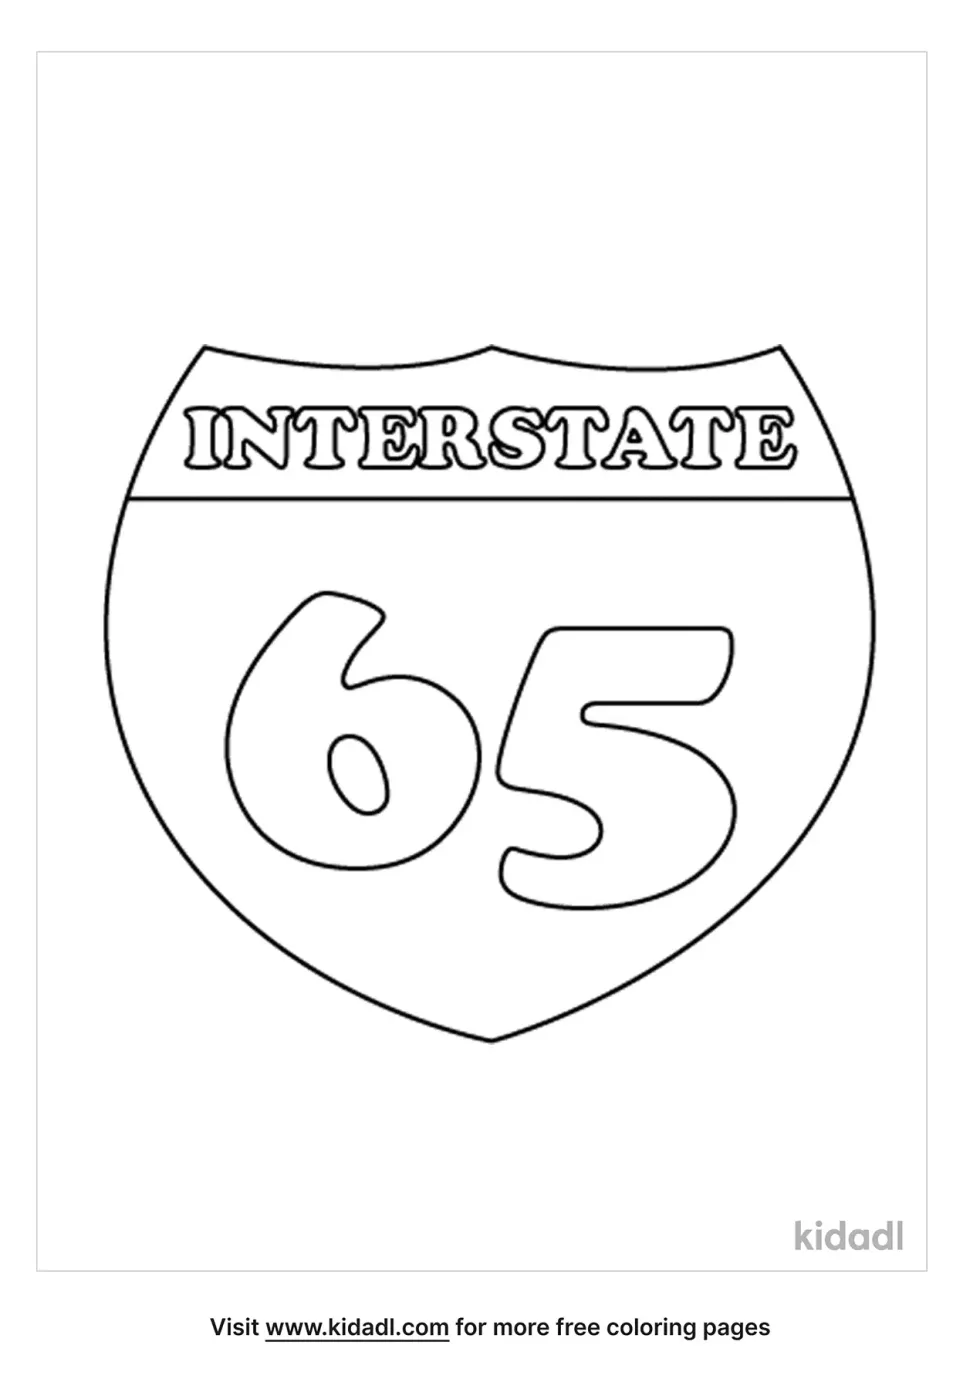 The Interstate 65